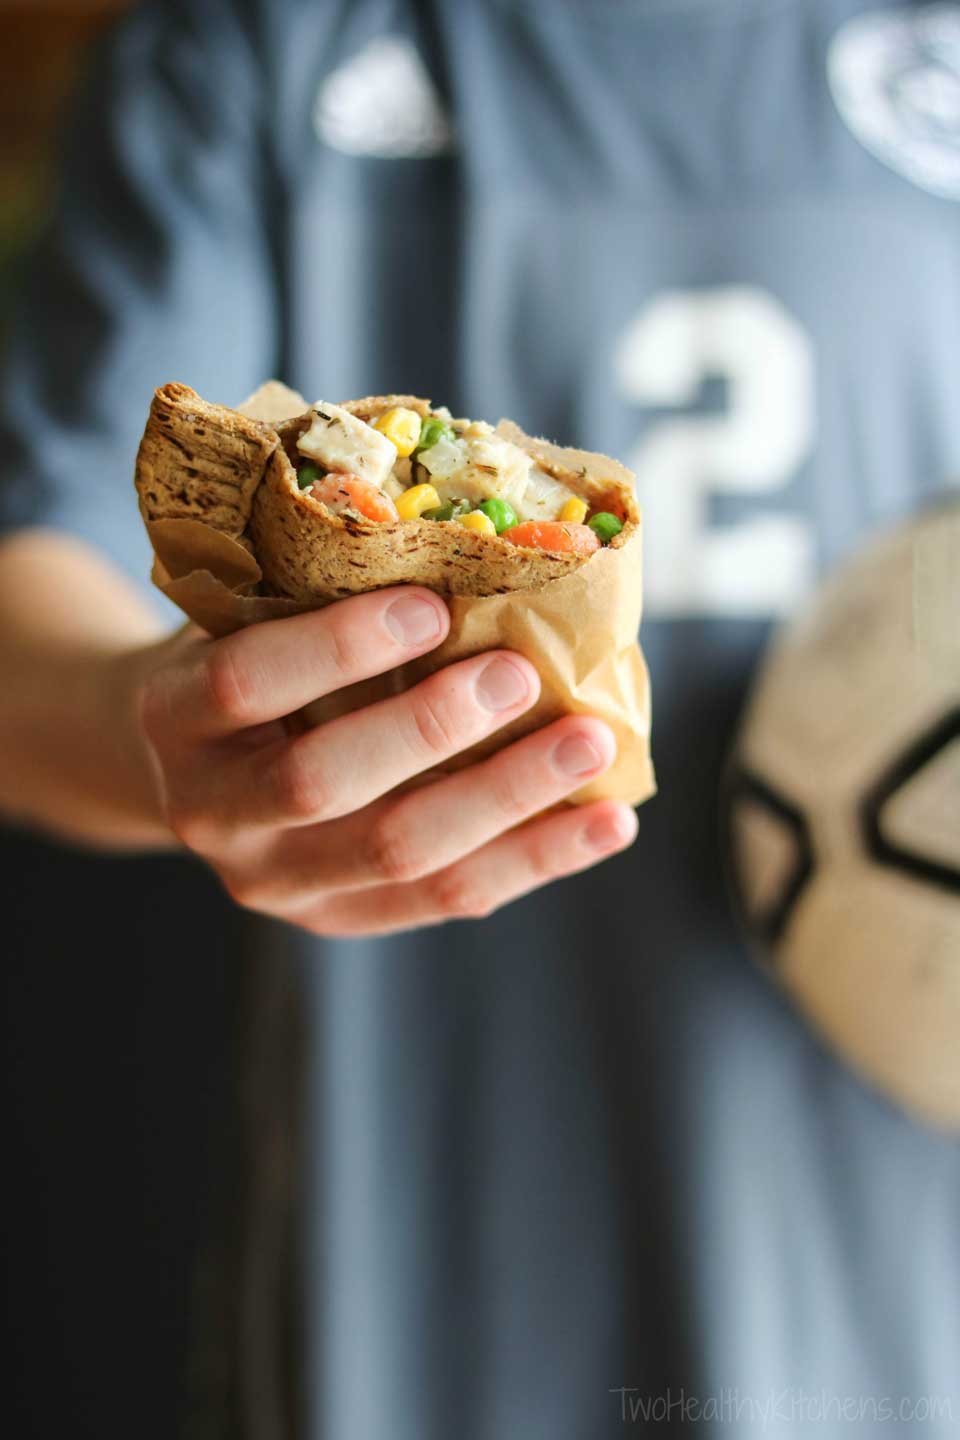 Whether you’re off to soccer practice … or any other busy evening activity, these healthy, Easy Chicken Pot Pie Hand Pies will keep your whole family fueled up, deliciously! If your family loves Hot Pockets, but you’d like to serve something a bit healthier, try this recipe … kinda like your own homemade Hot Pockets! | www.TwoHealthyKitchens.com